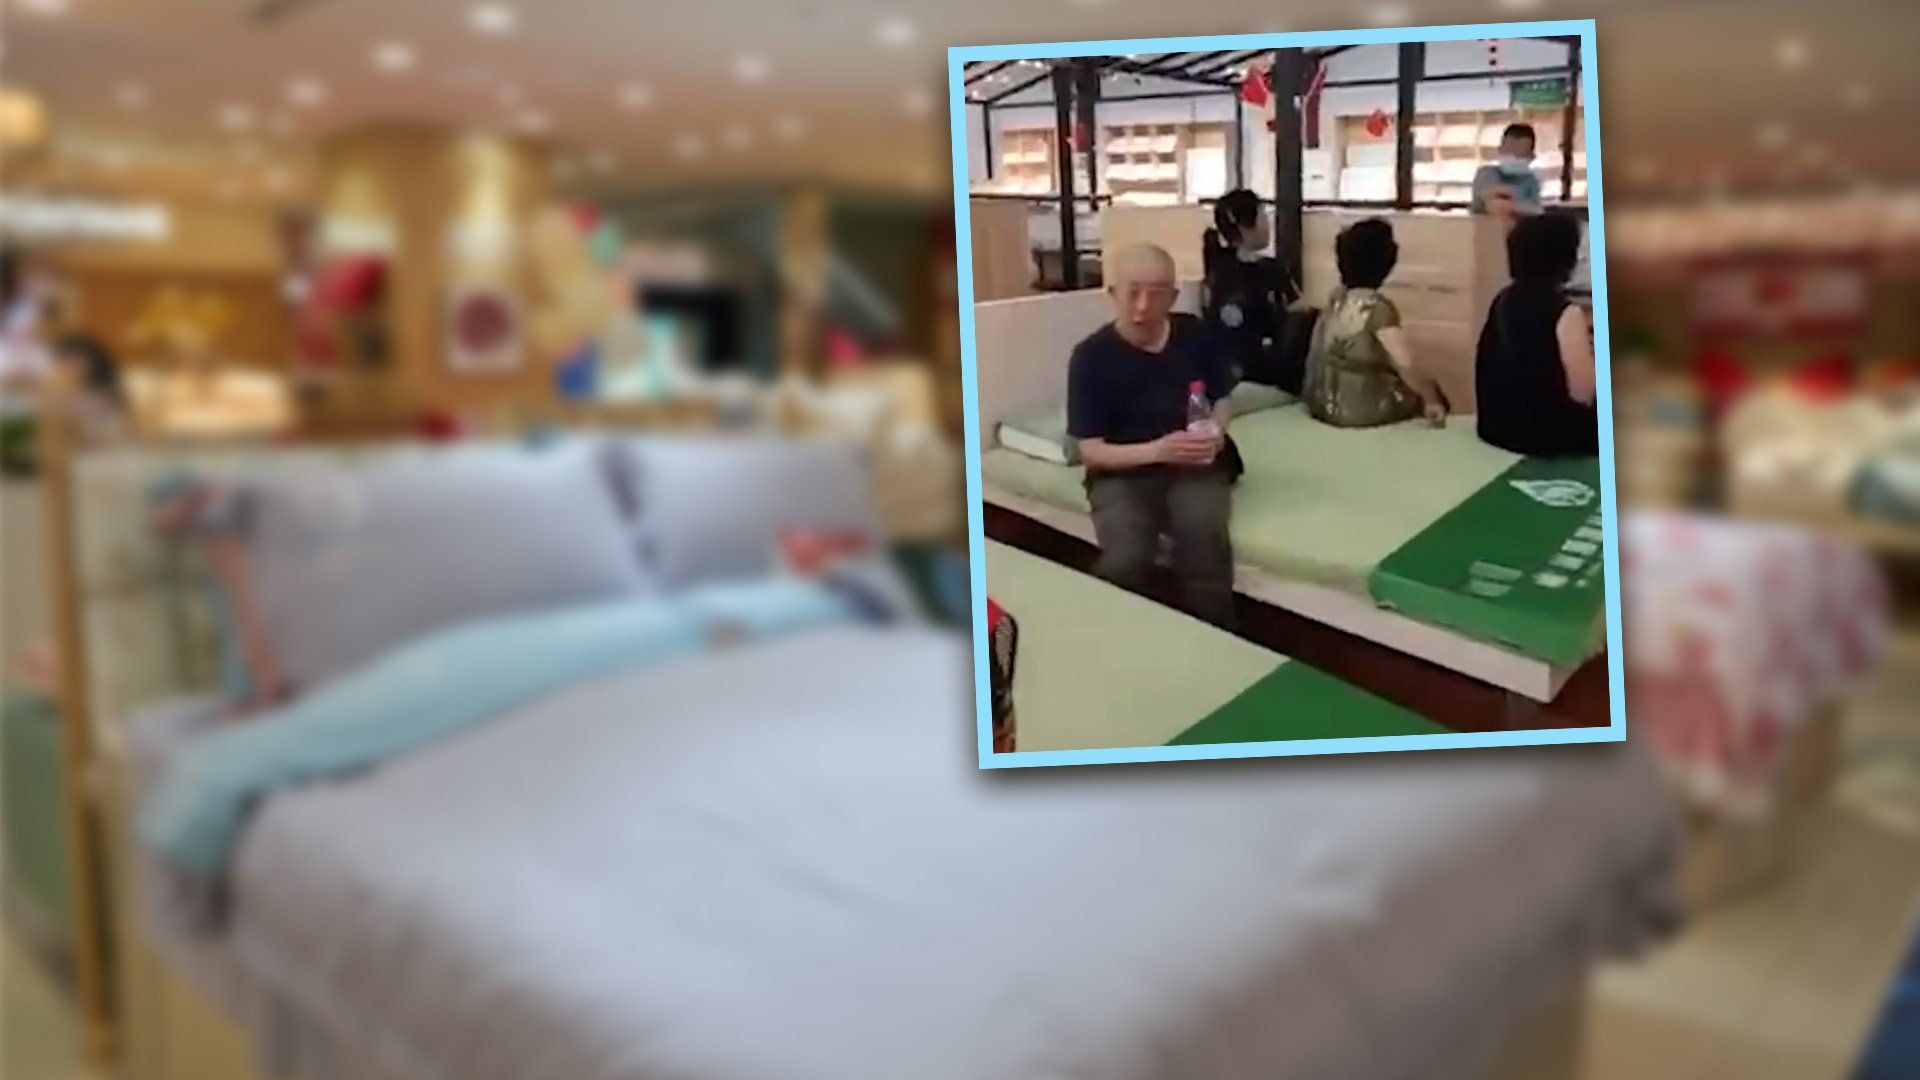 A group of tourists has been held captive in a mattress shop after they were told to shop or they “would not be allowed to leave” in the latest case of forced shopping in China. Photo: SCMP composite/Shutterstock/Weibo